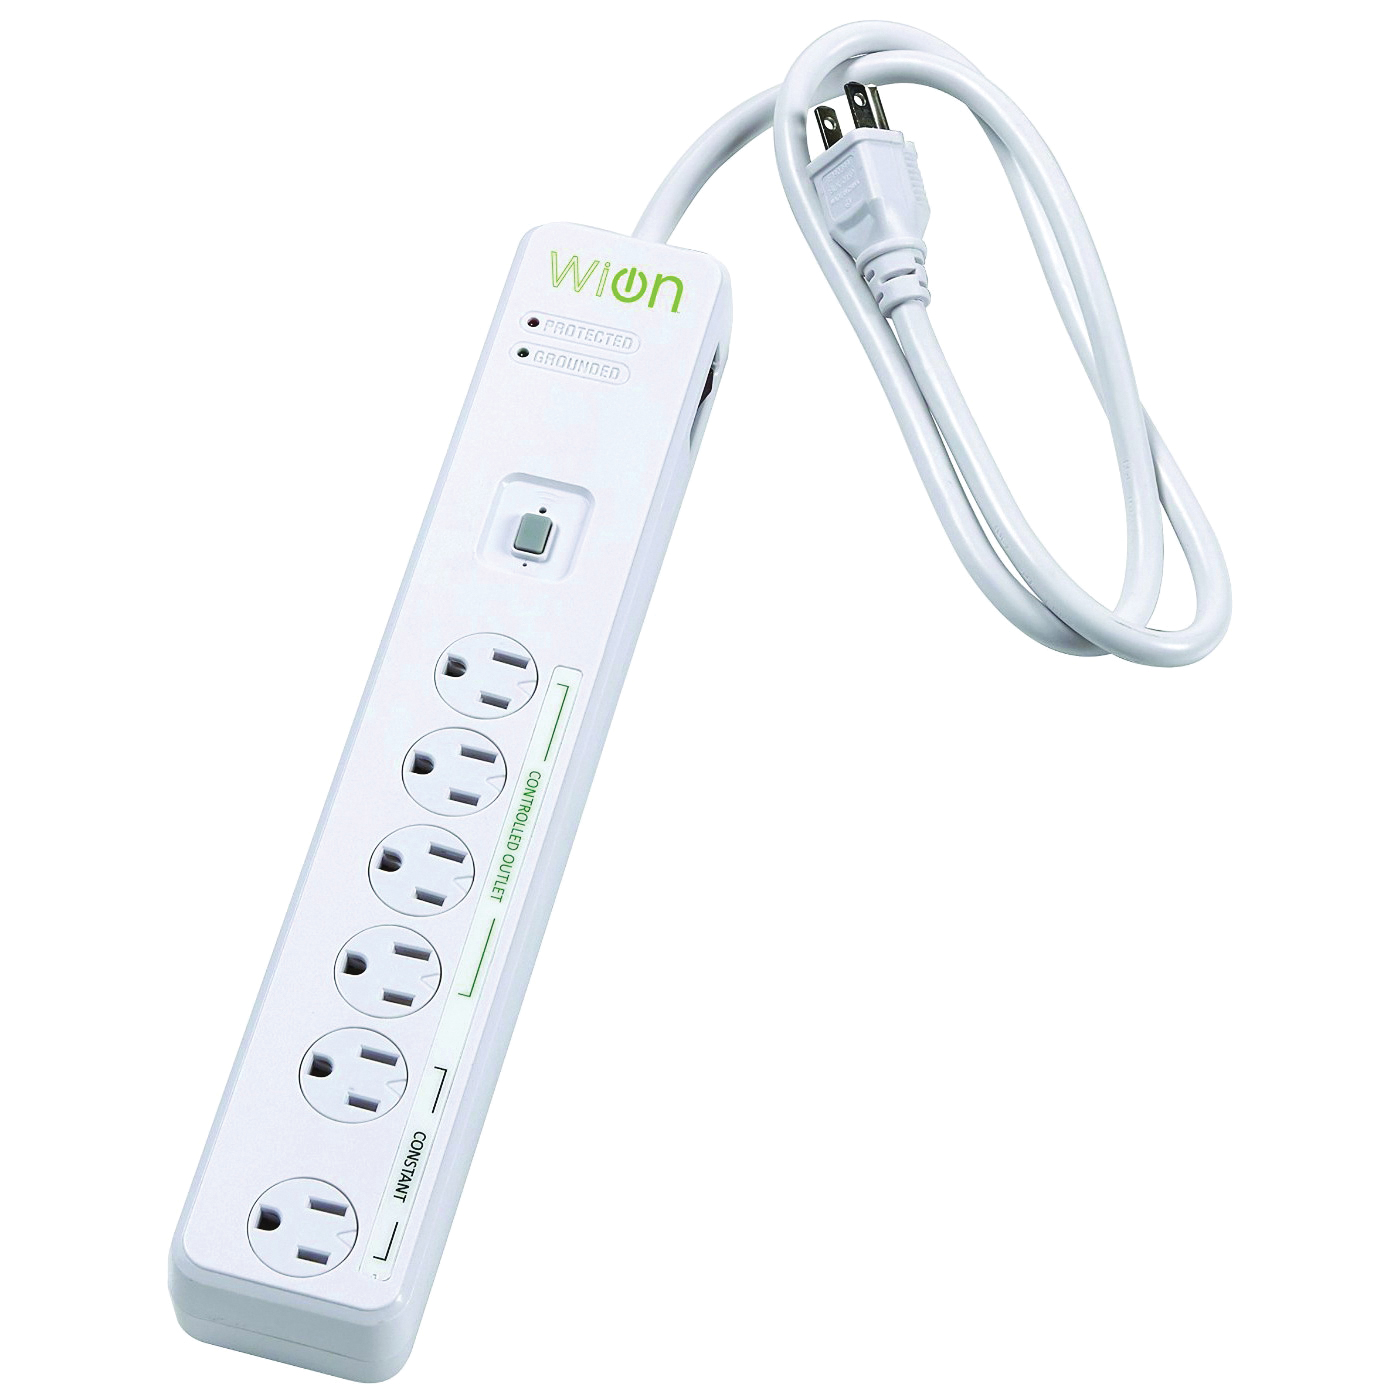 50051 Surge Protector, 120 V, 15 A, 4 -Outlet, 900 J Energy, White